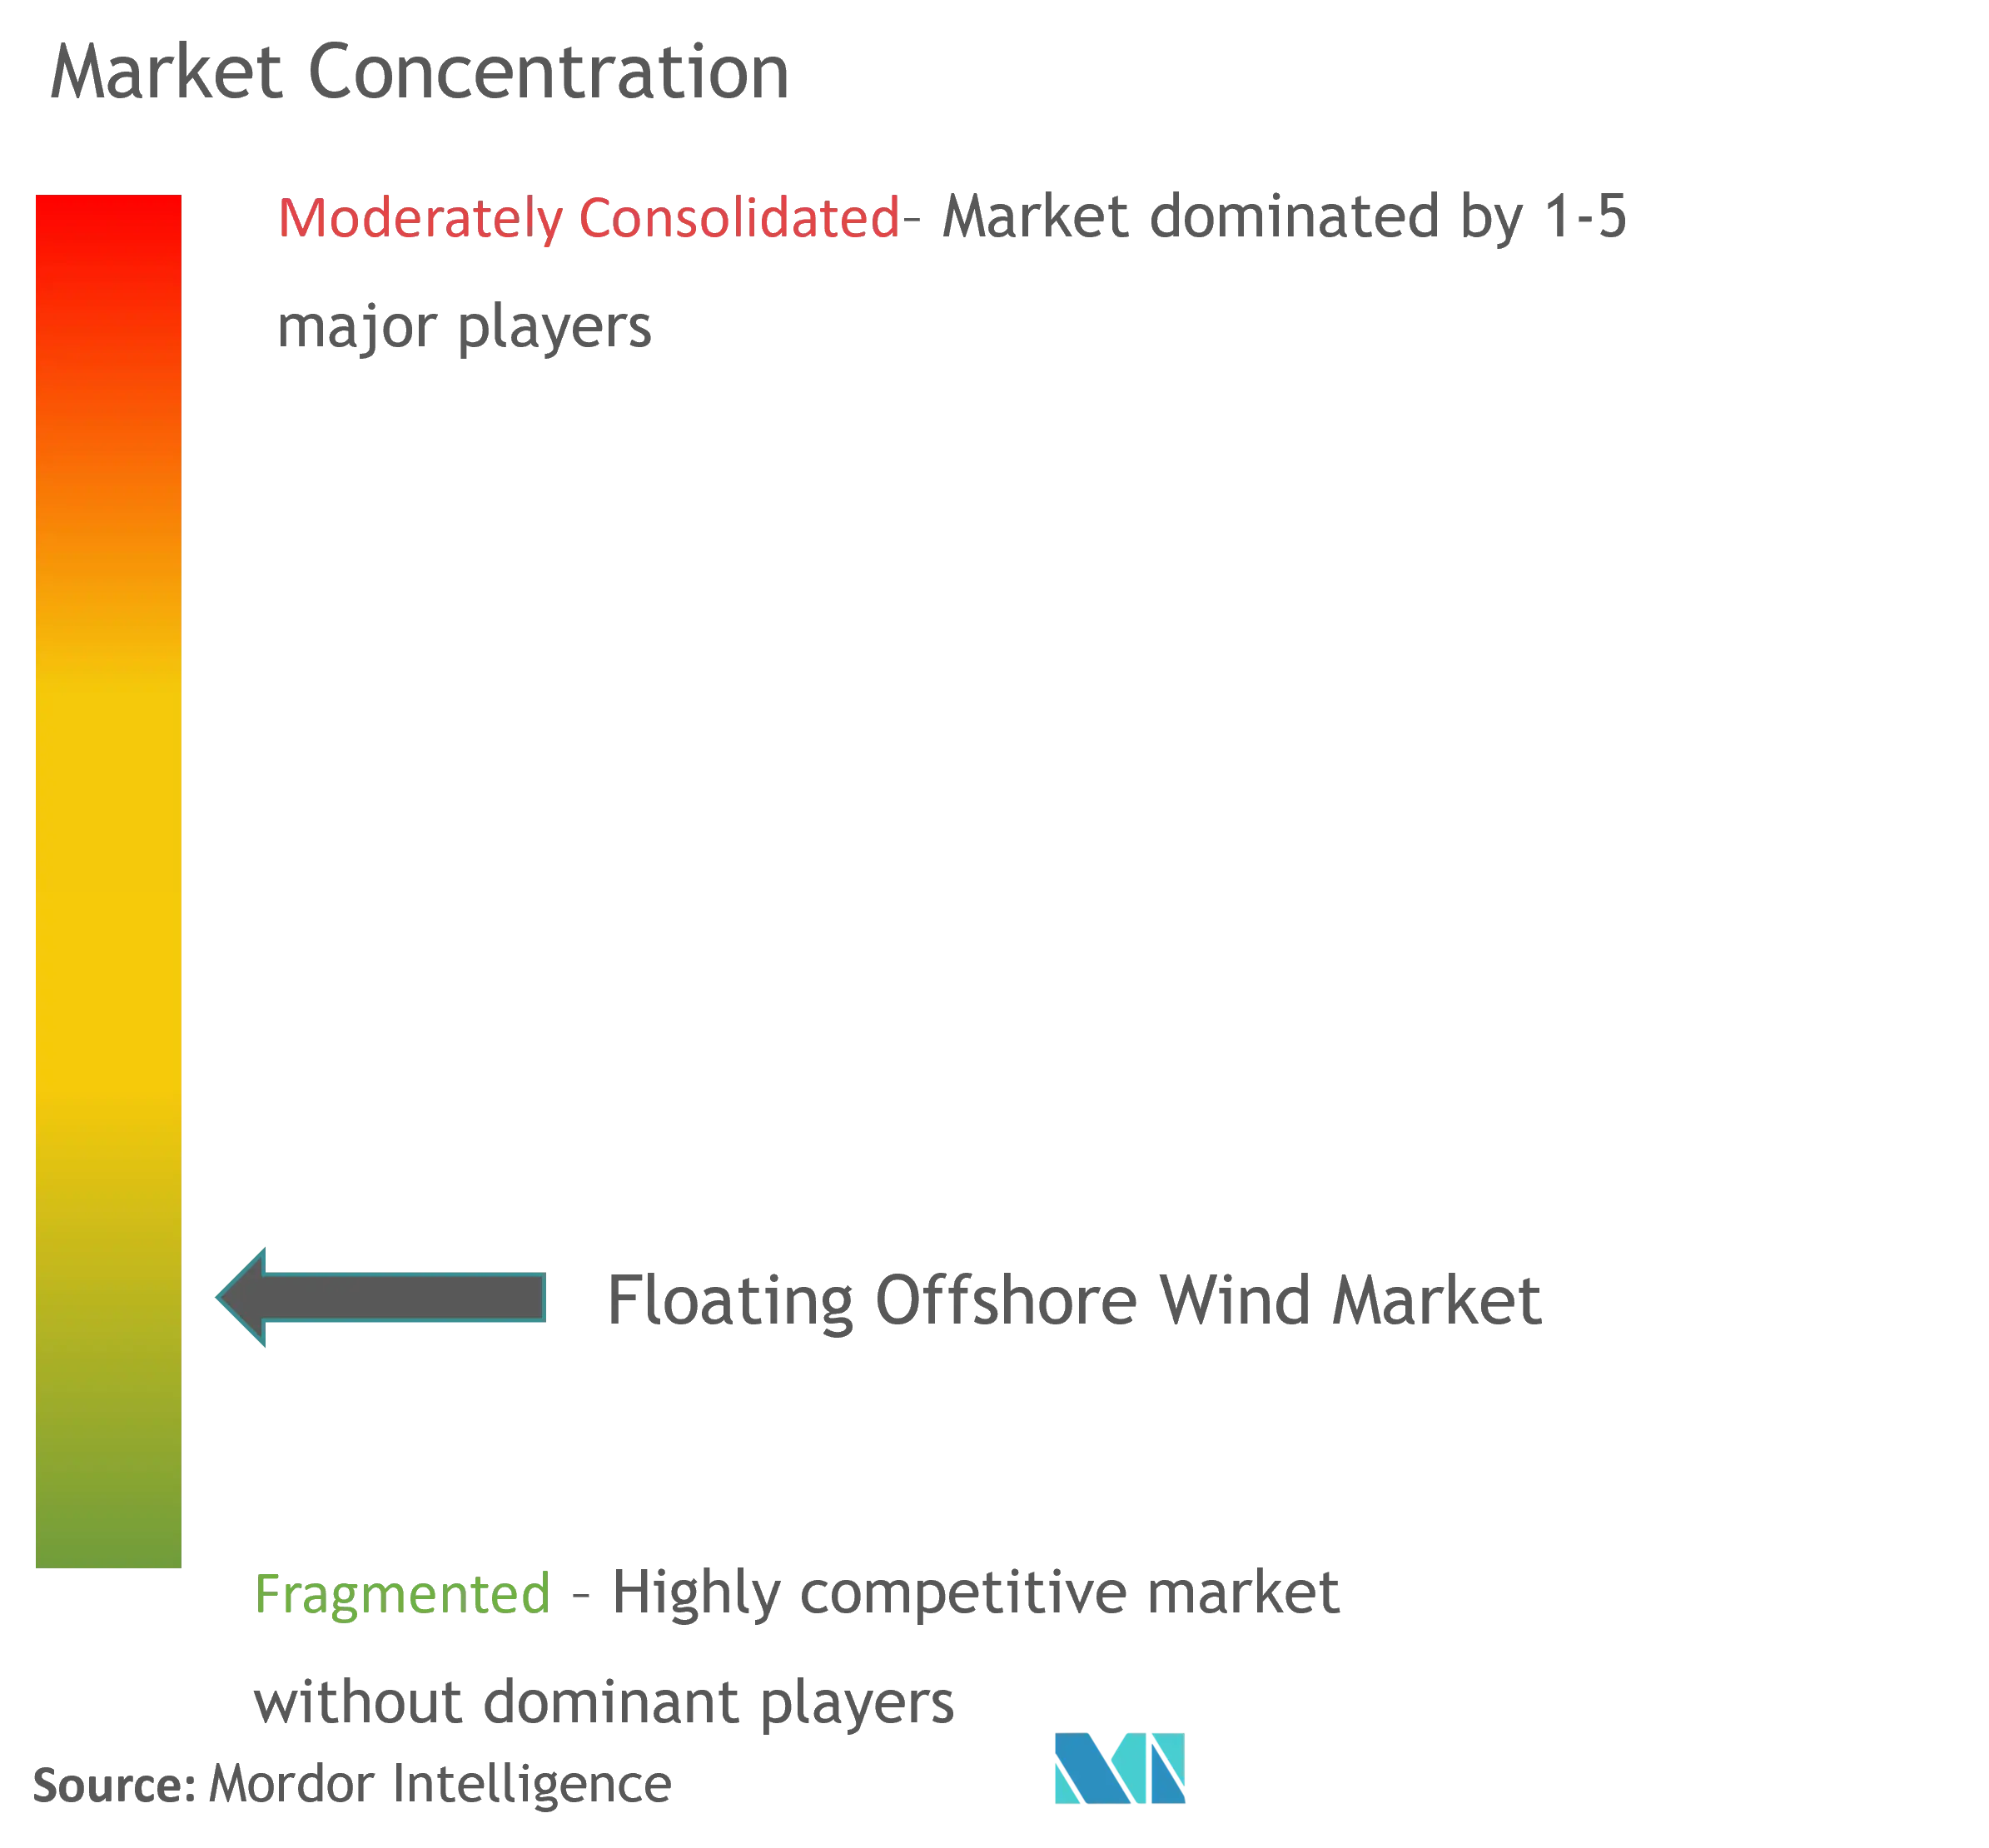 Floating Offshore Wind Power Market Concentration